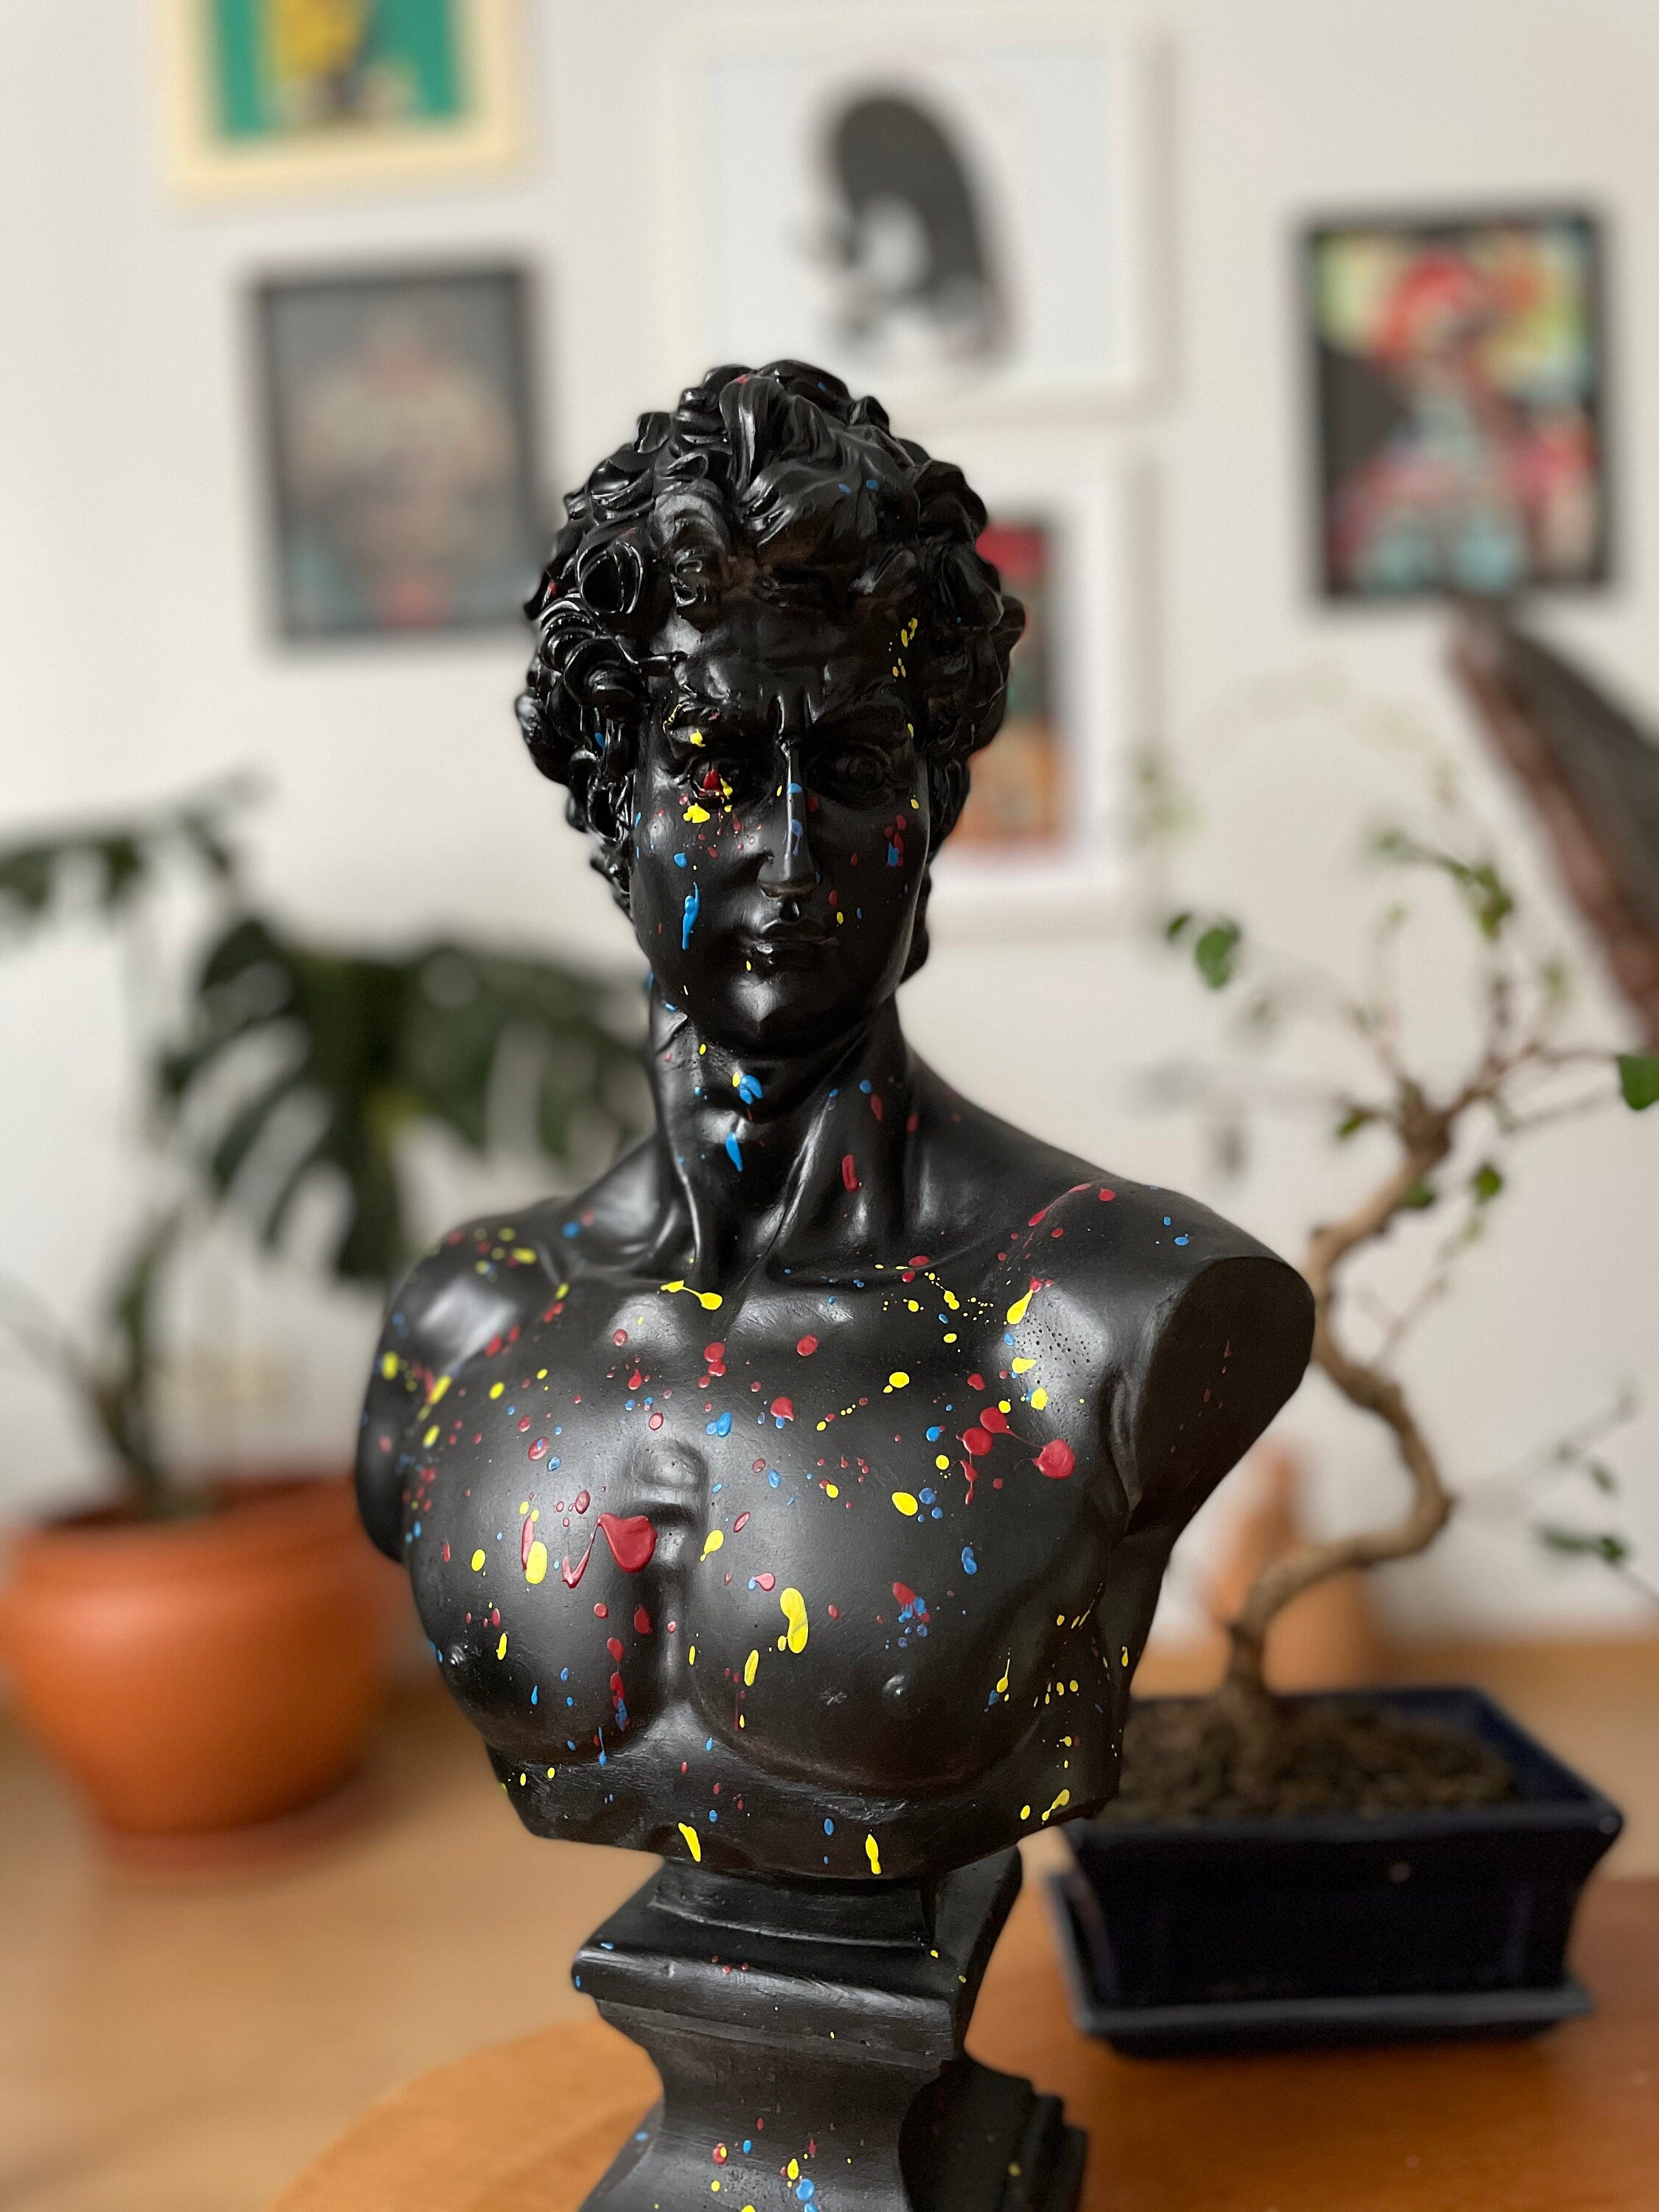 Dynamic Contrasts: Large David Bust Sculpture with Colorful Strips